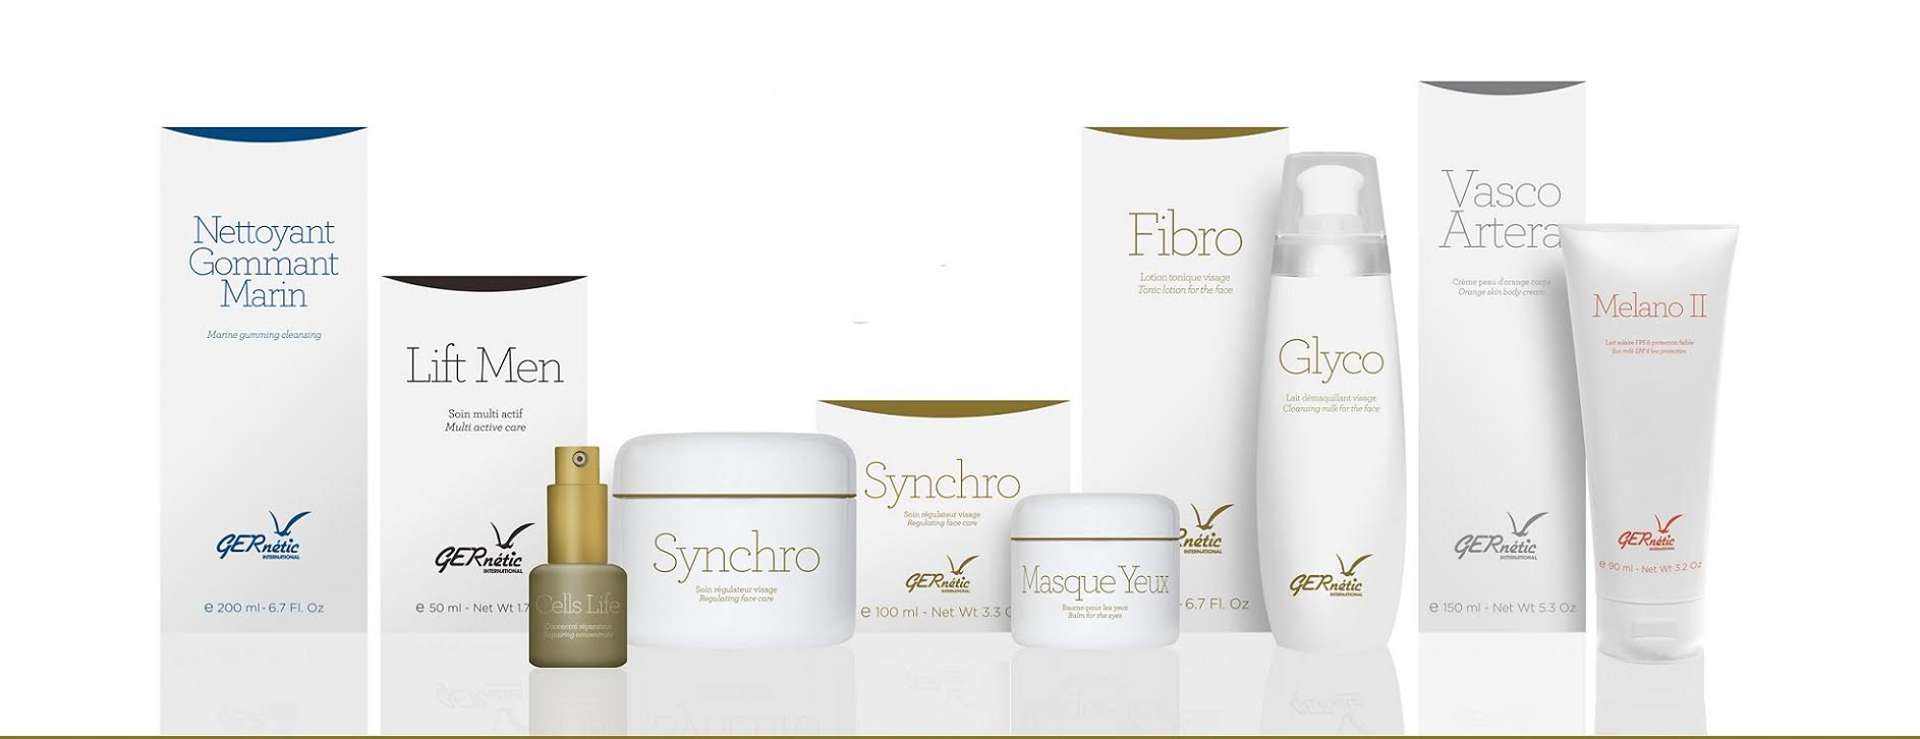 Welcome to the Epitome of World Class Skin Care